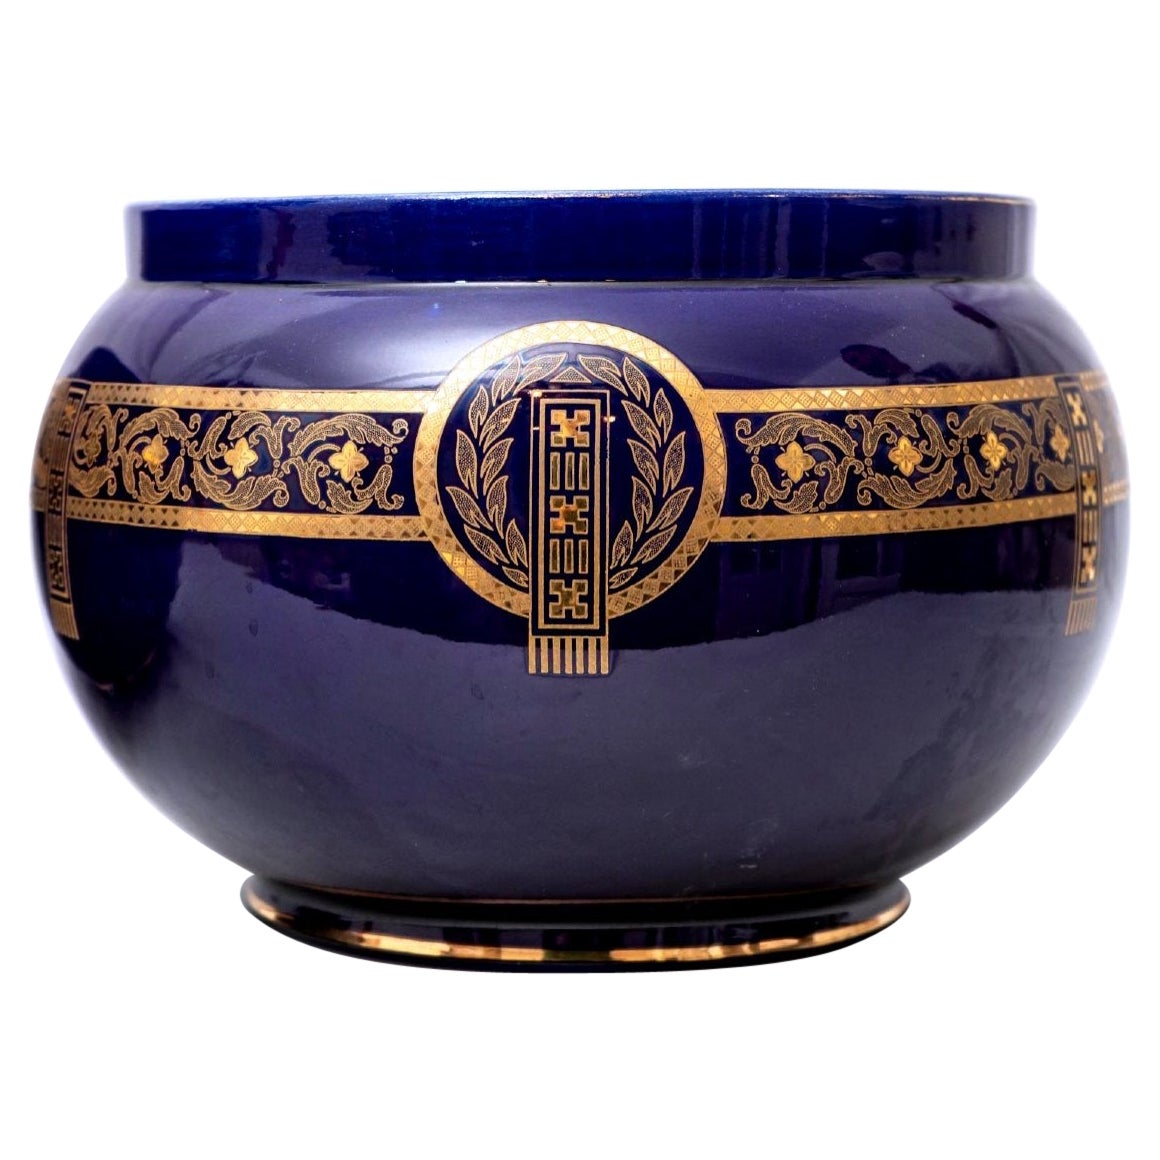 Pair Of Large Planters - Signed And Numbered Sarreguemines - Dark Cobalt Blue -  For Sale